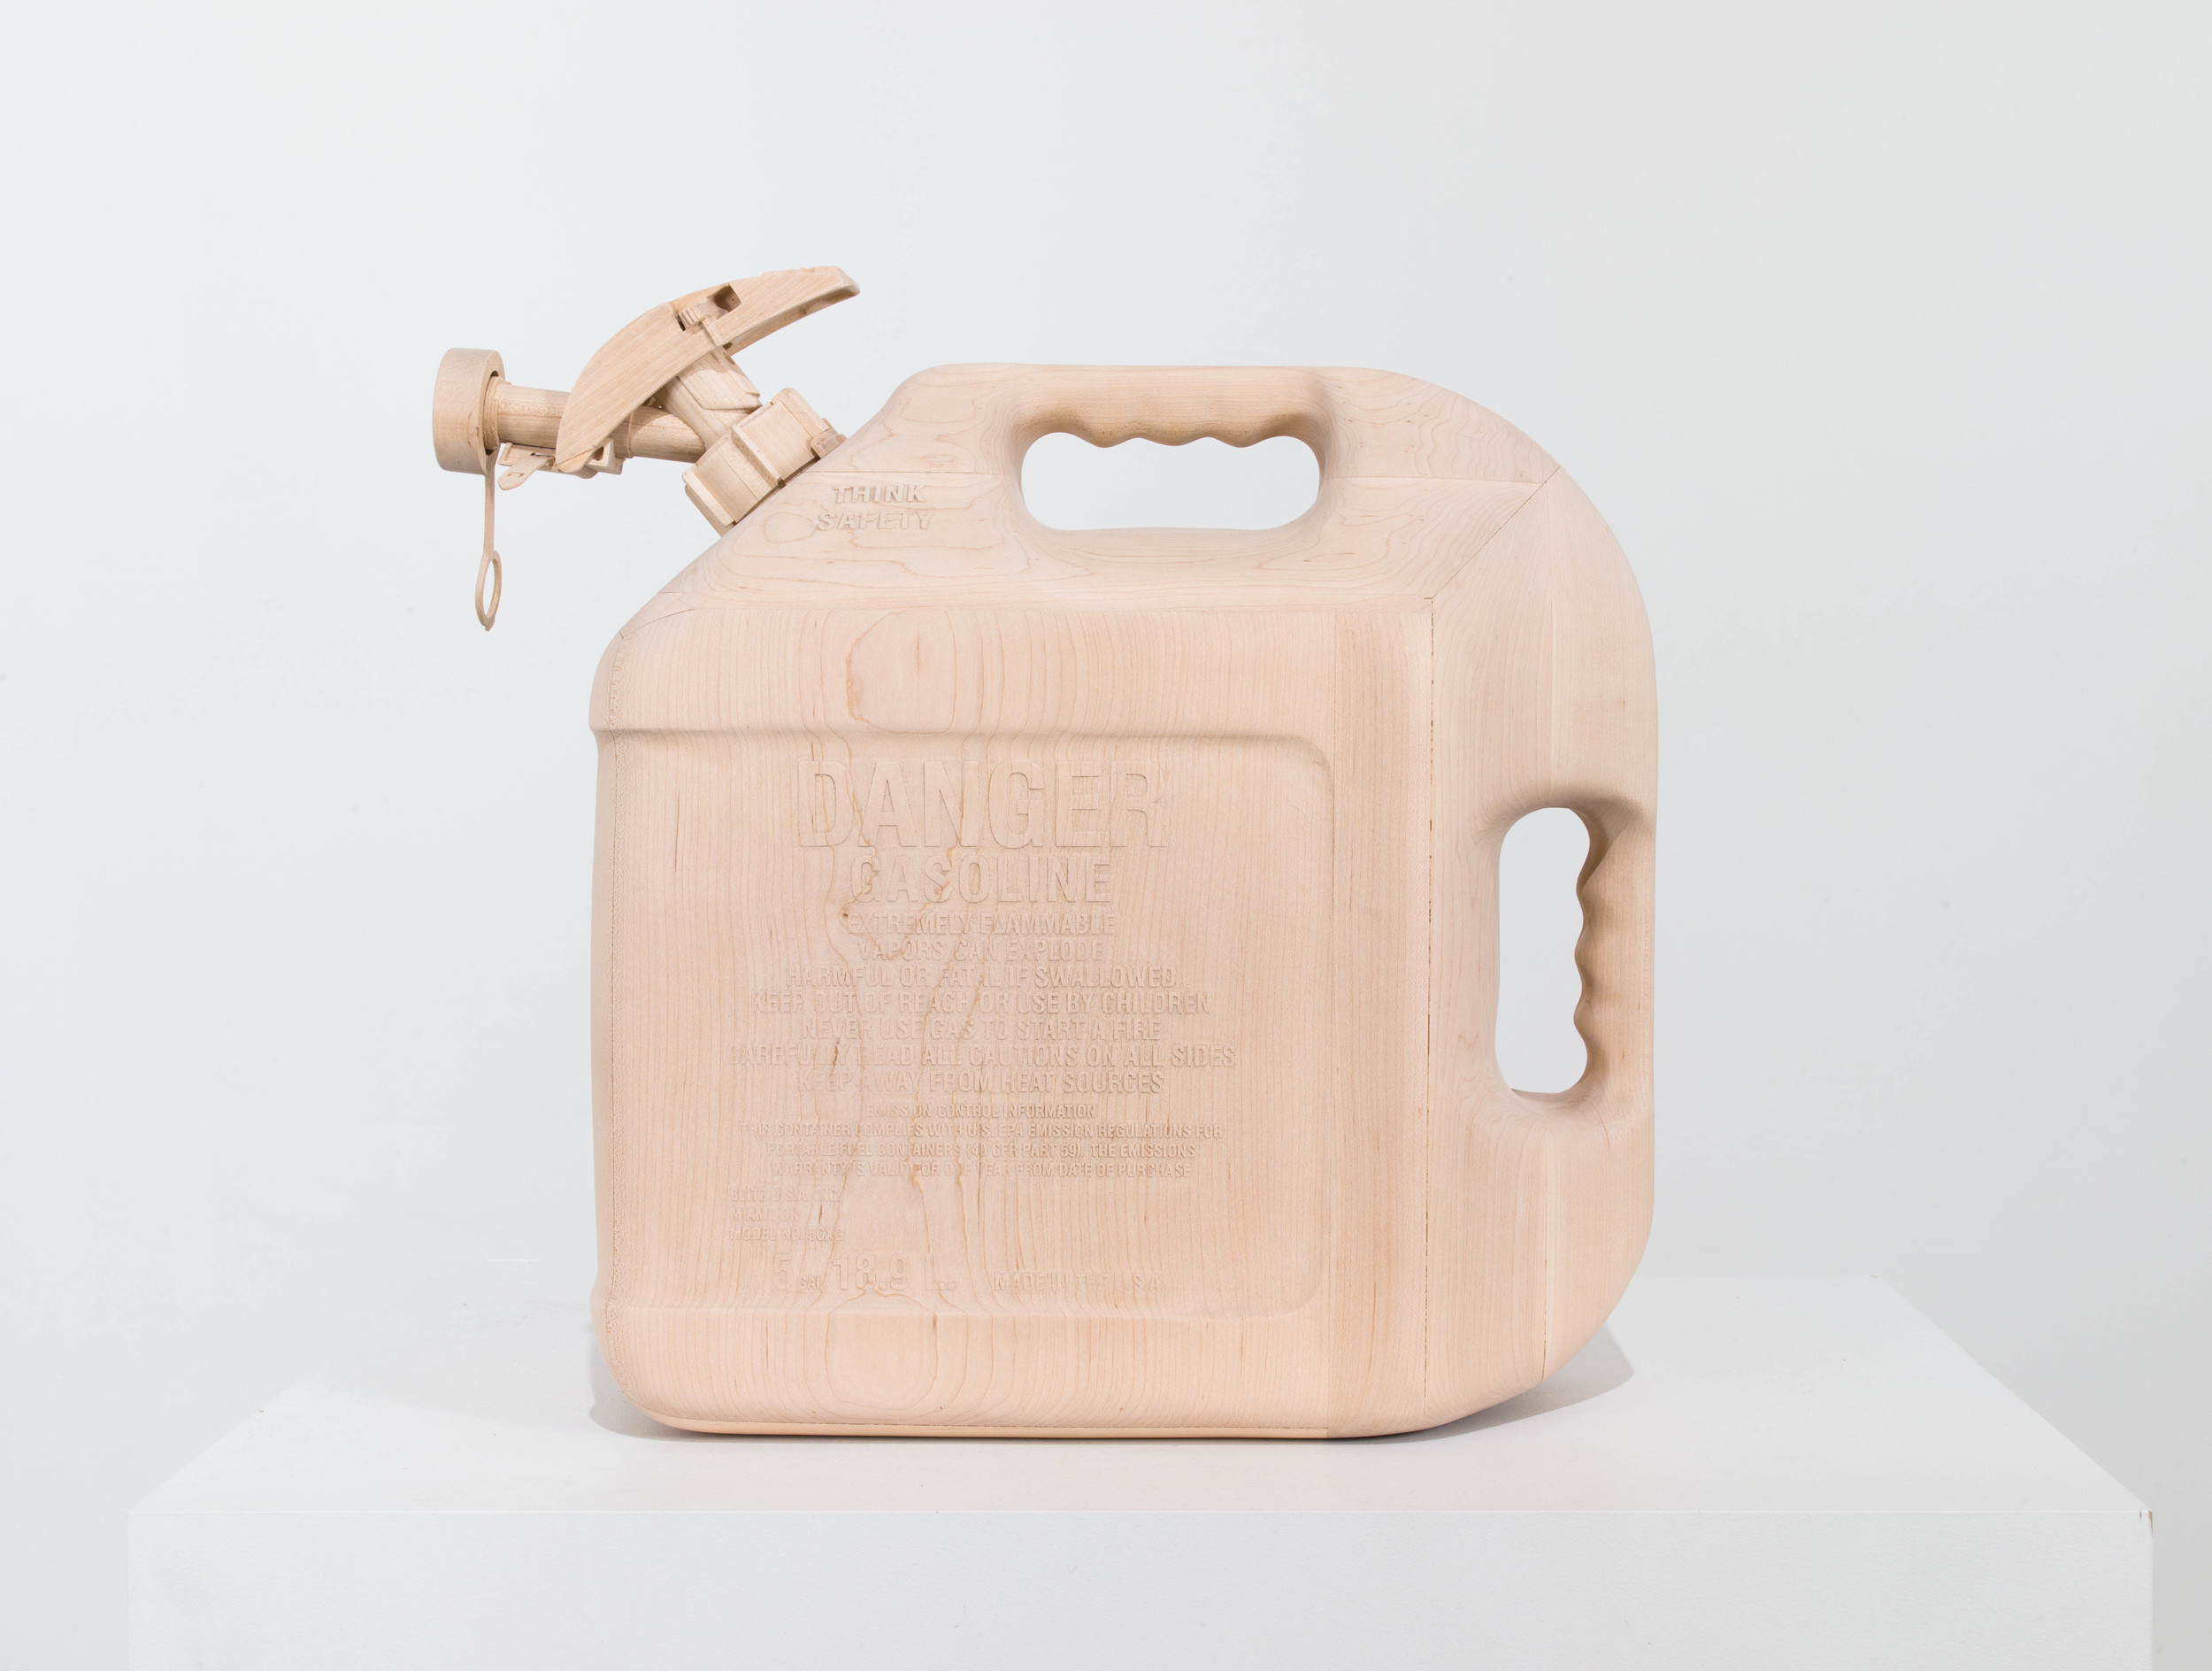  Gas Can, 2013, Maple wood, 16 1/2 x 8 1/2 x 17 1/2 inches 